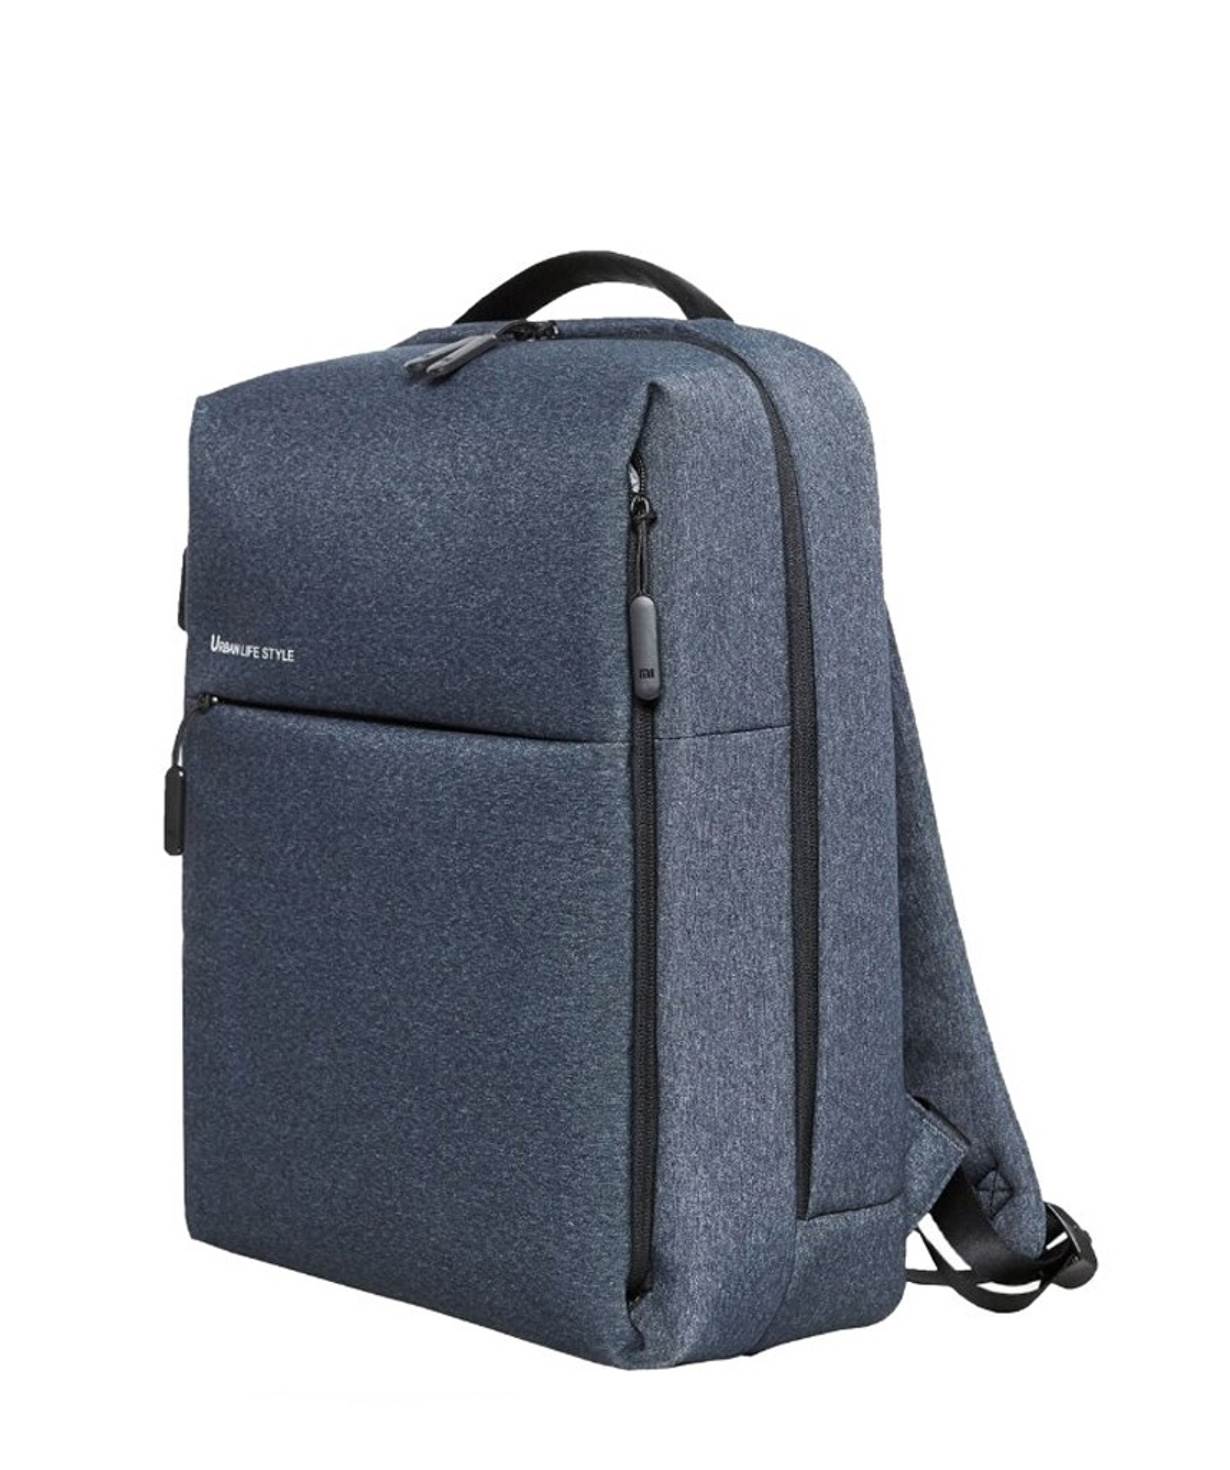 Backpack  `Xiaomi Urban Life Style`